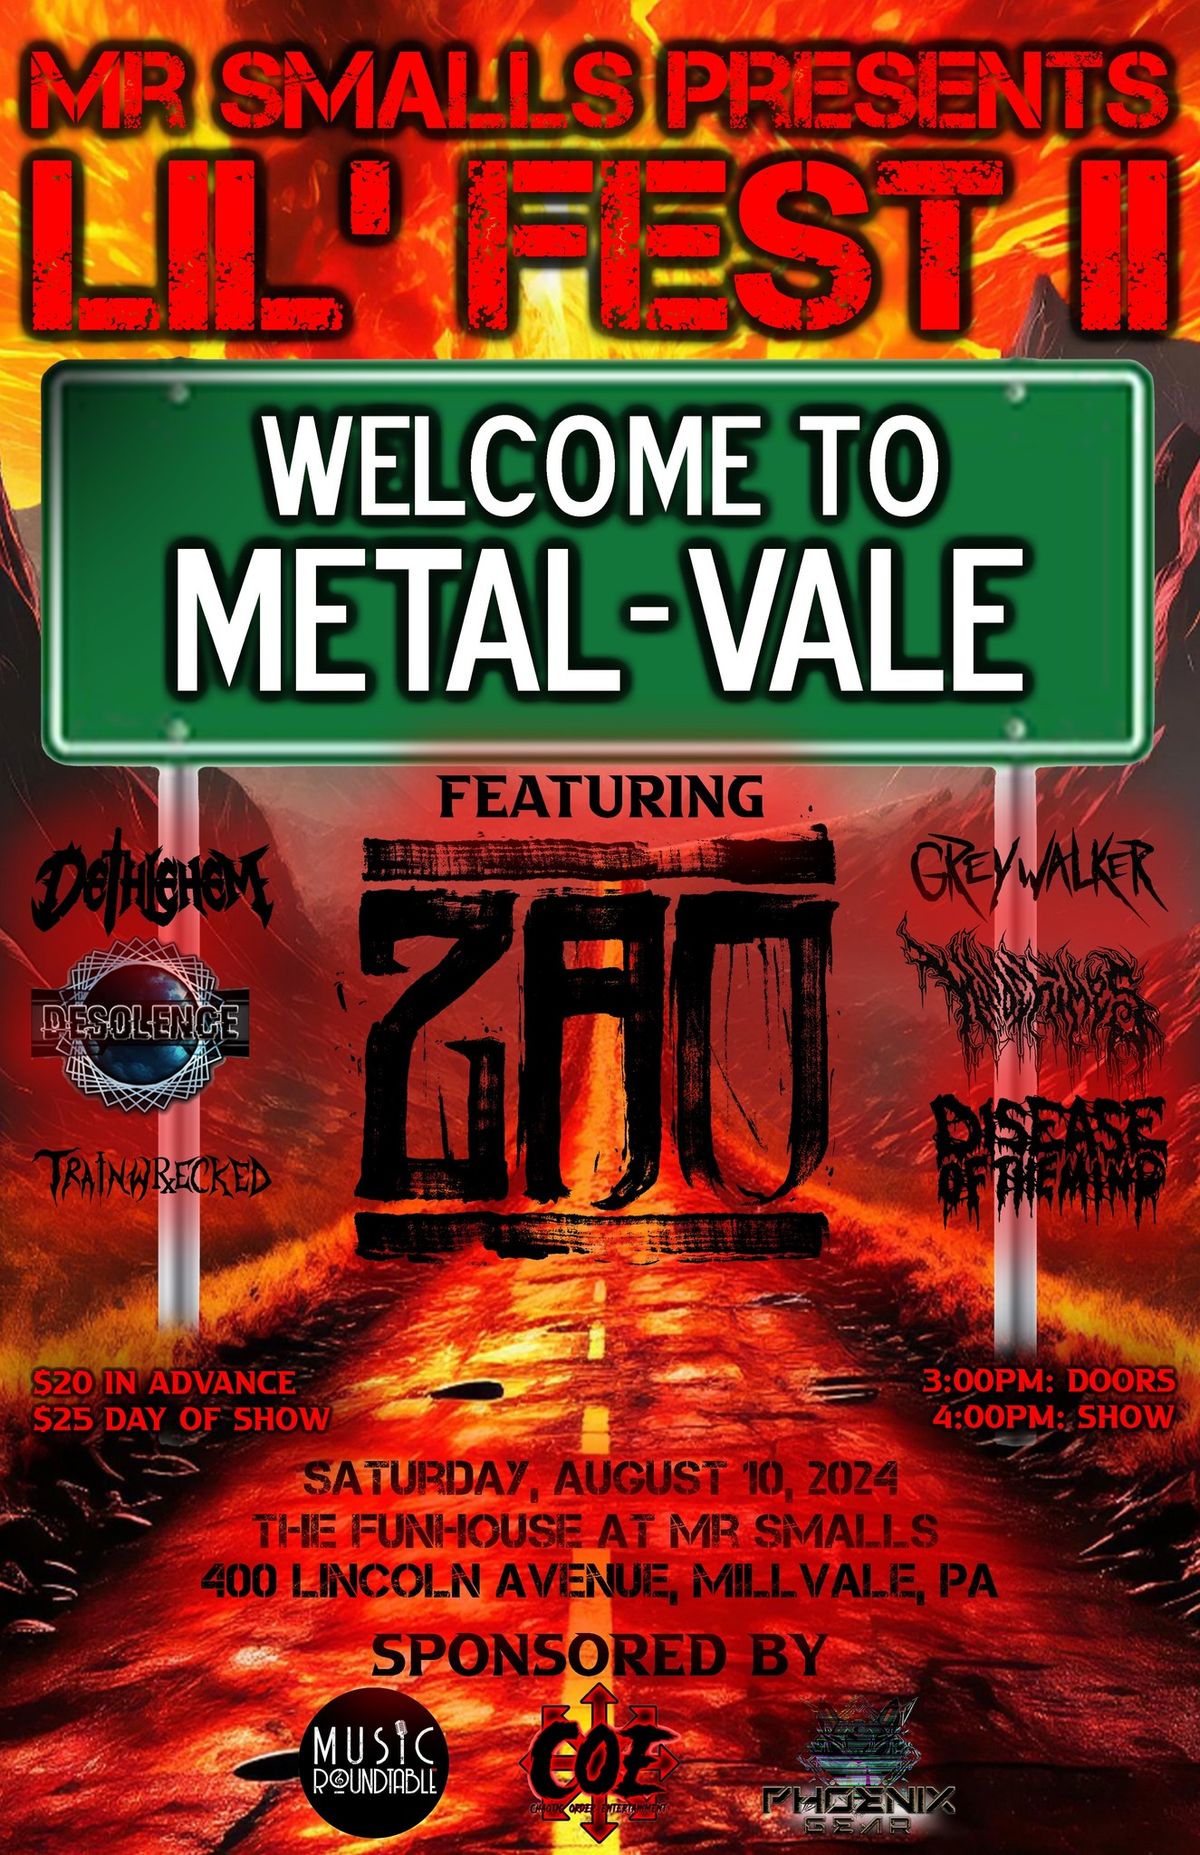 Lil' Fest II: Welcome to Metal-Vale ft. Zao 